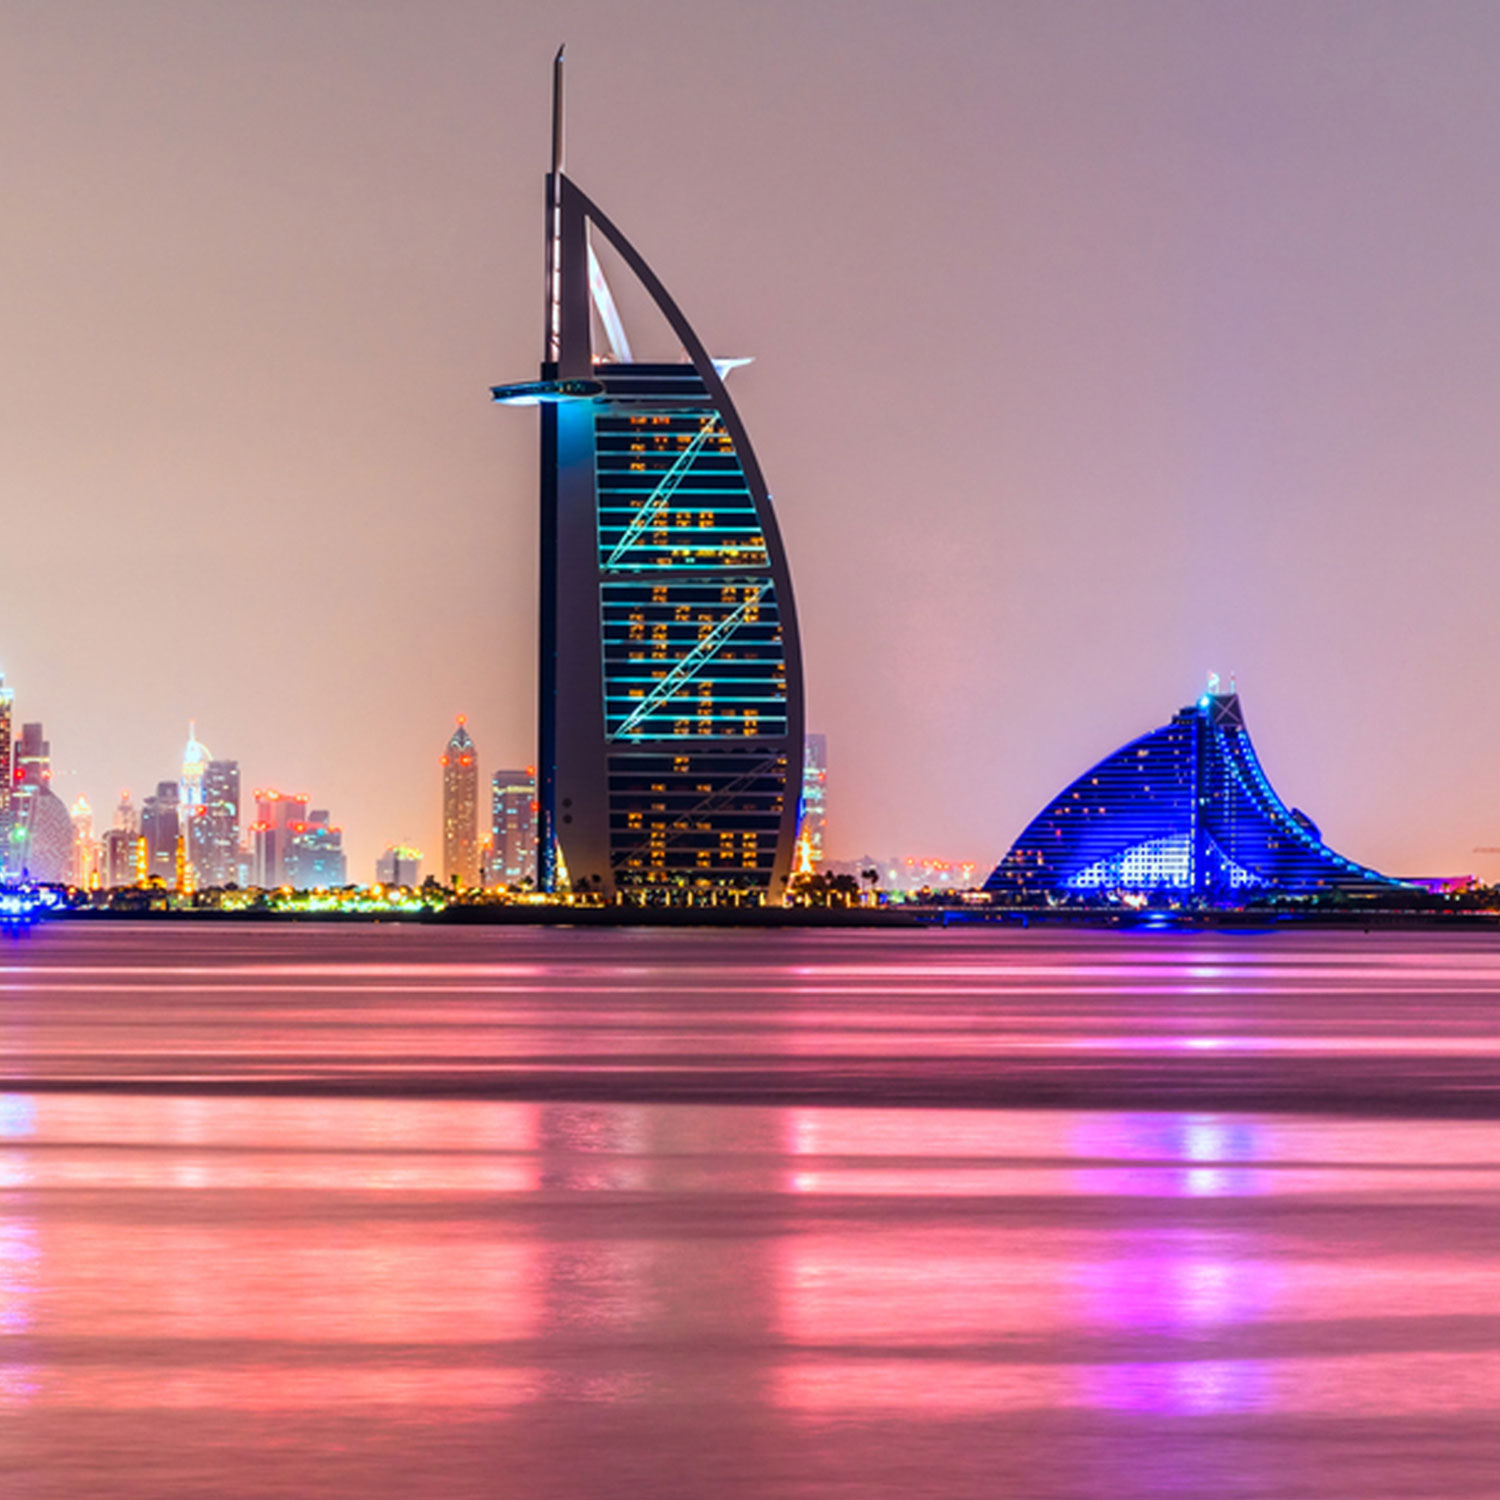 10 Things You Didn’t Know About Dubai